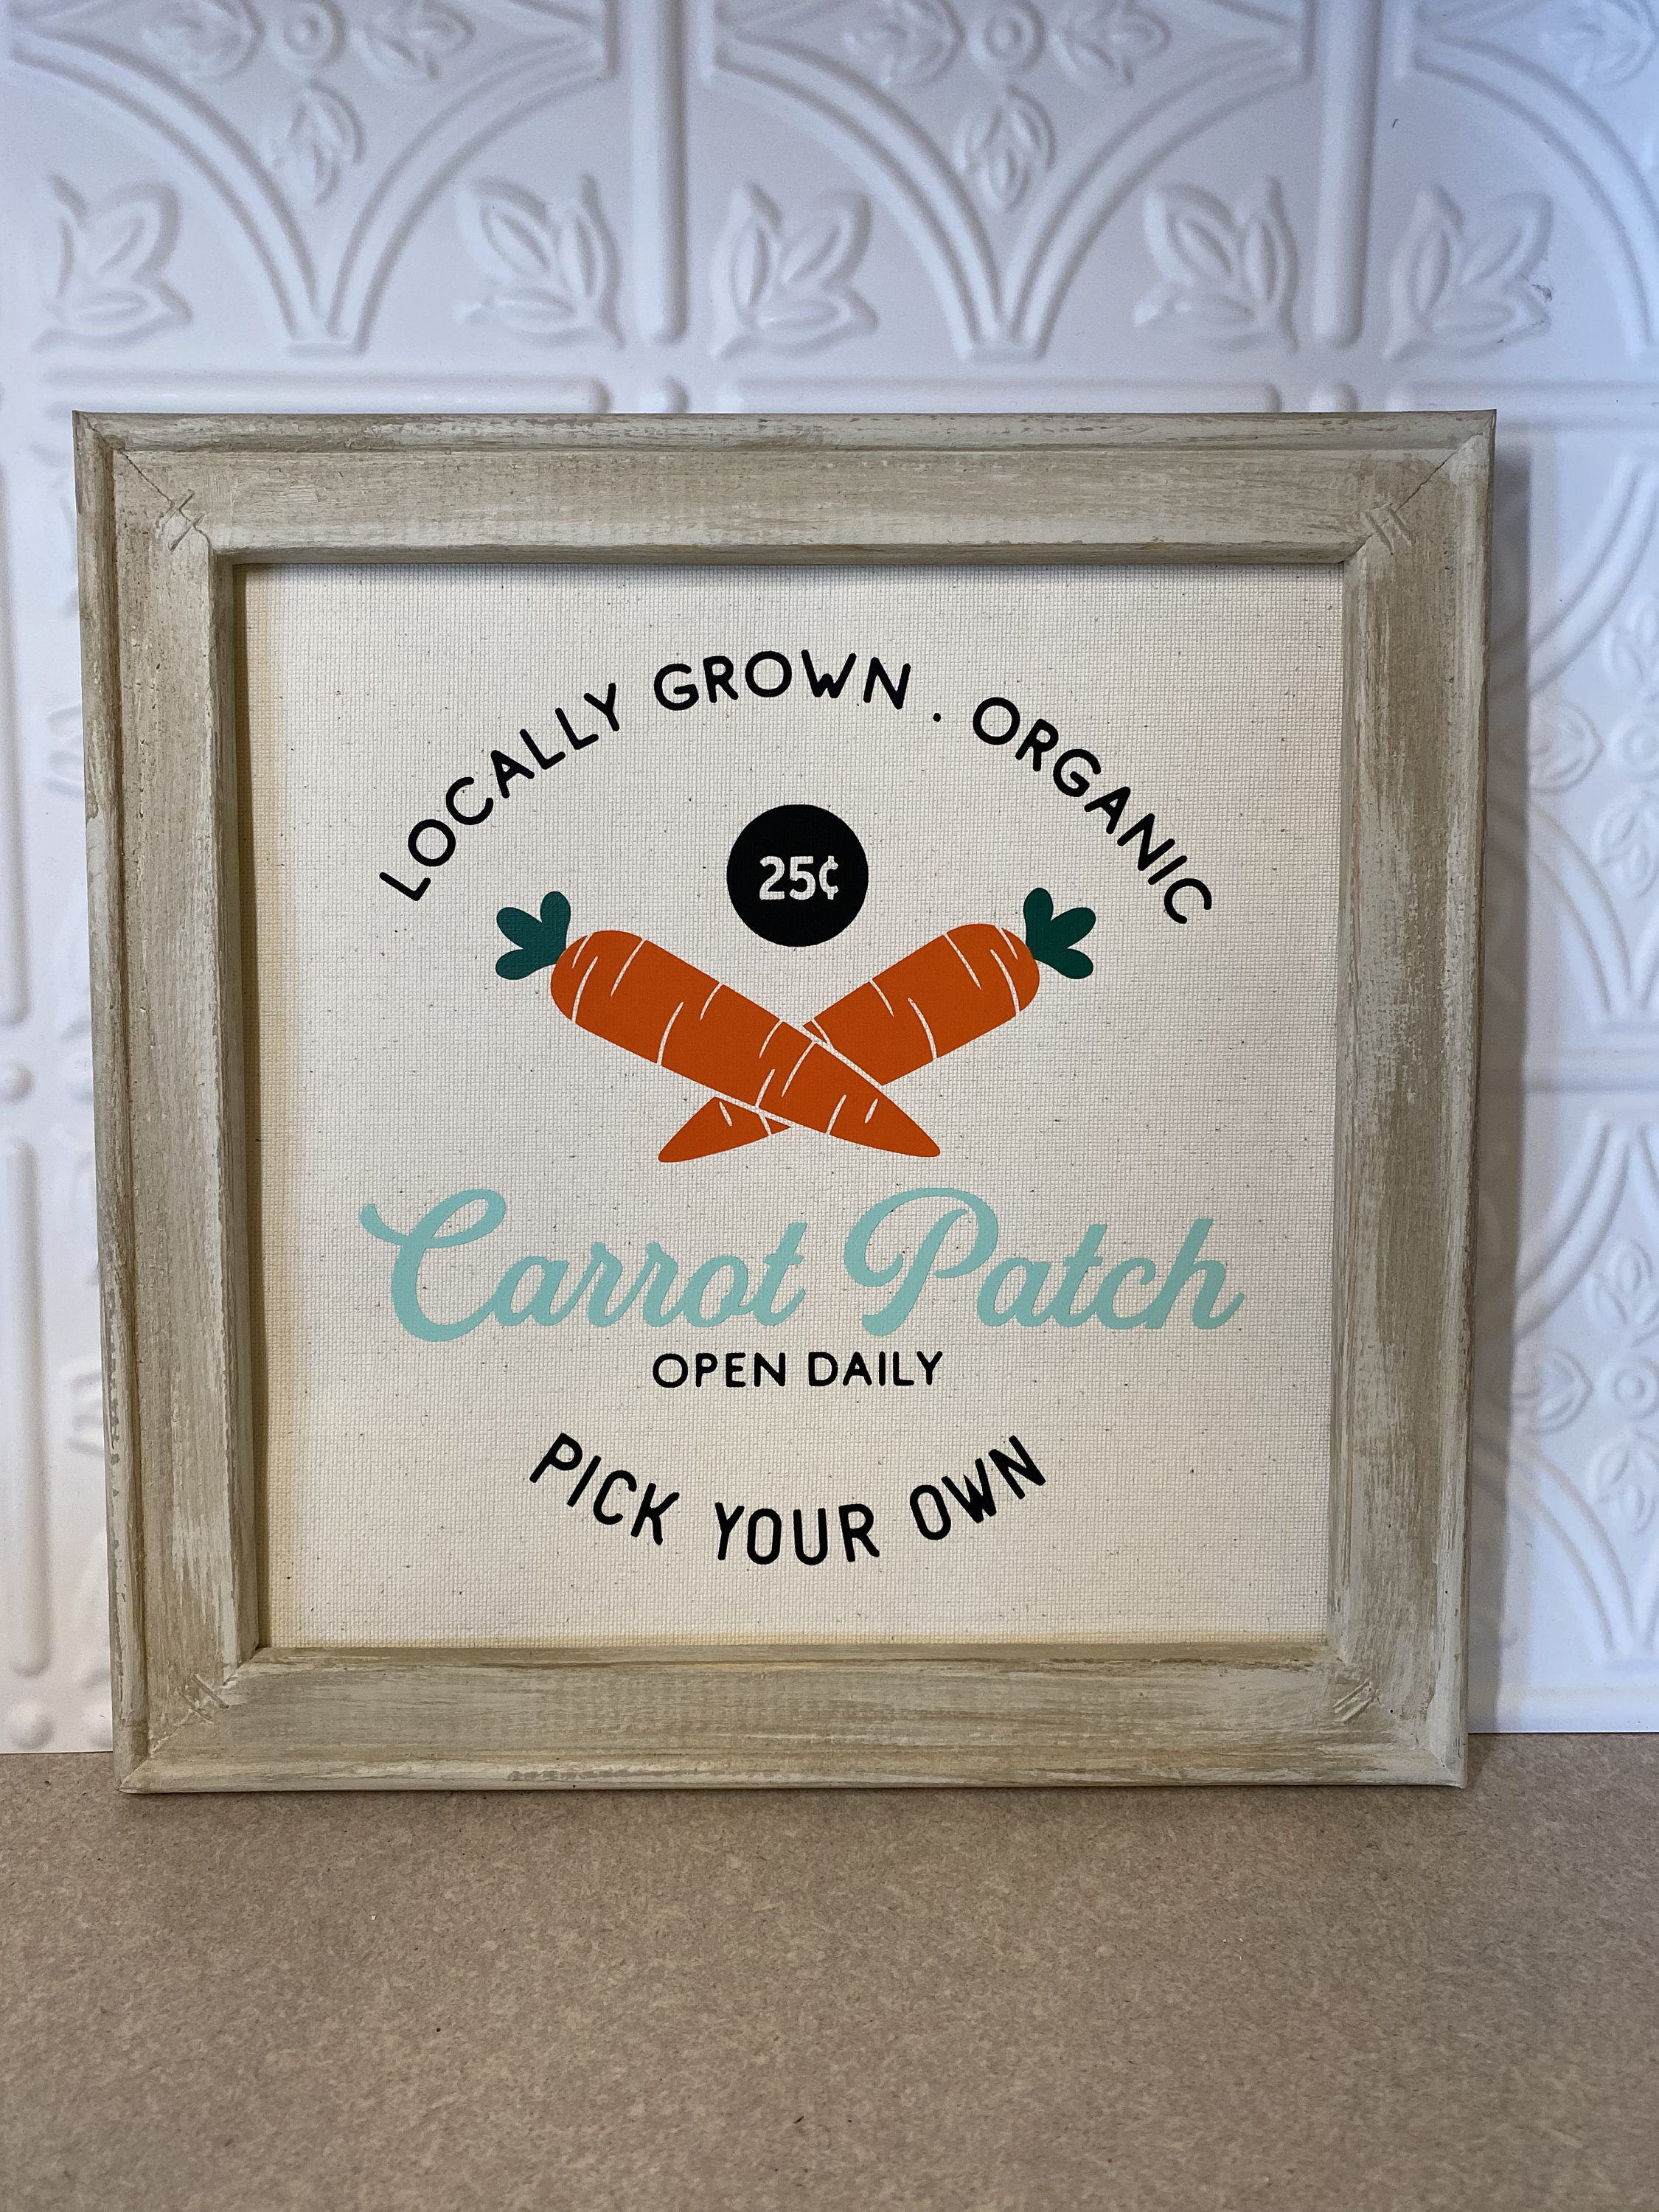 Carrot Patch| Reverse Canvas| Easter Sign | Farmhouse Easter Decor | Spring  Home Decor| Carrot patch